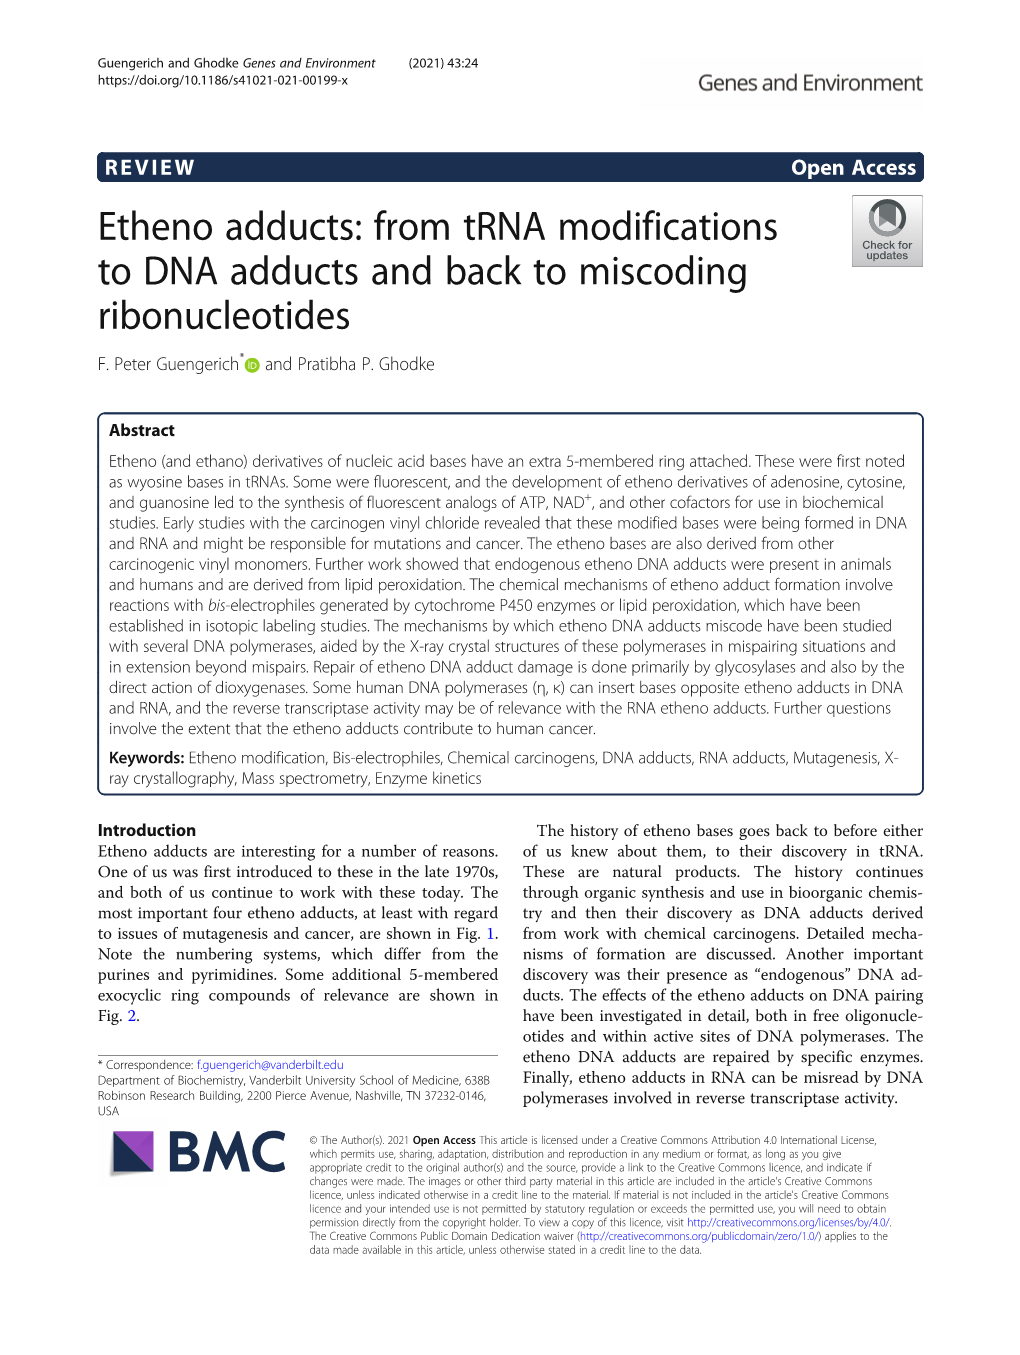 From Trna Modifications to DNA Adducts and Back to Miscoding Ribonucleotides F